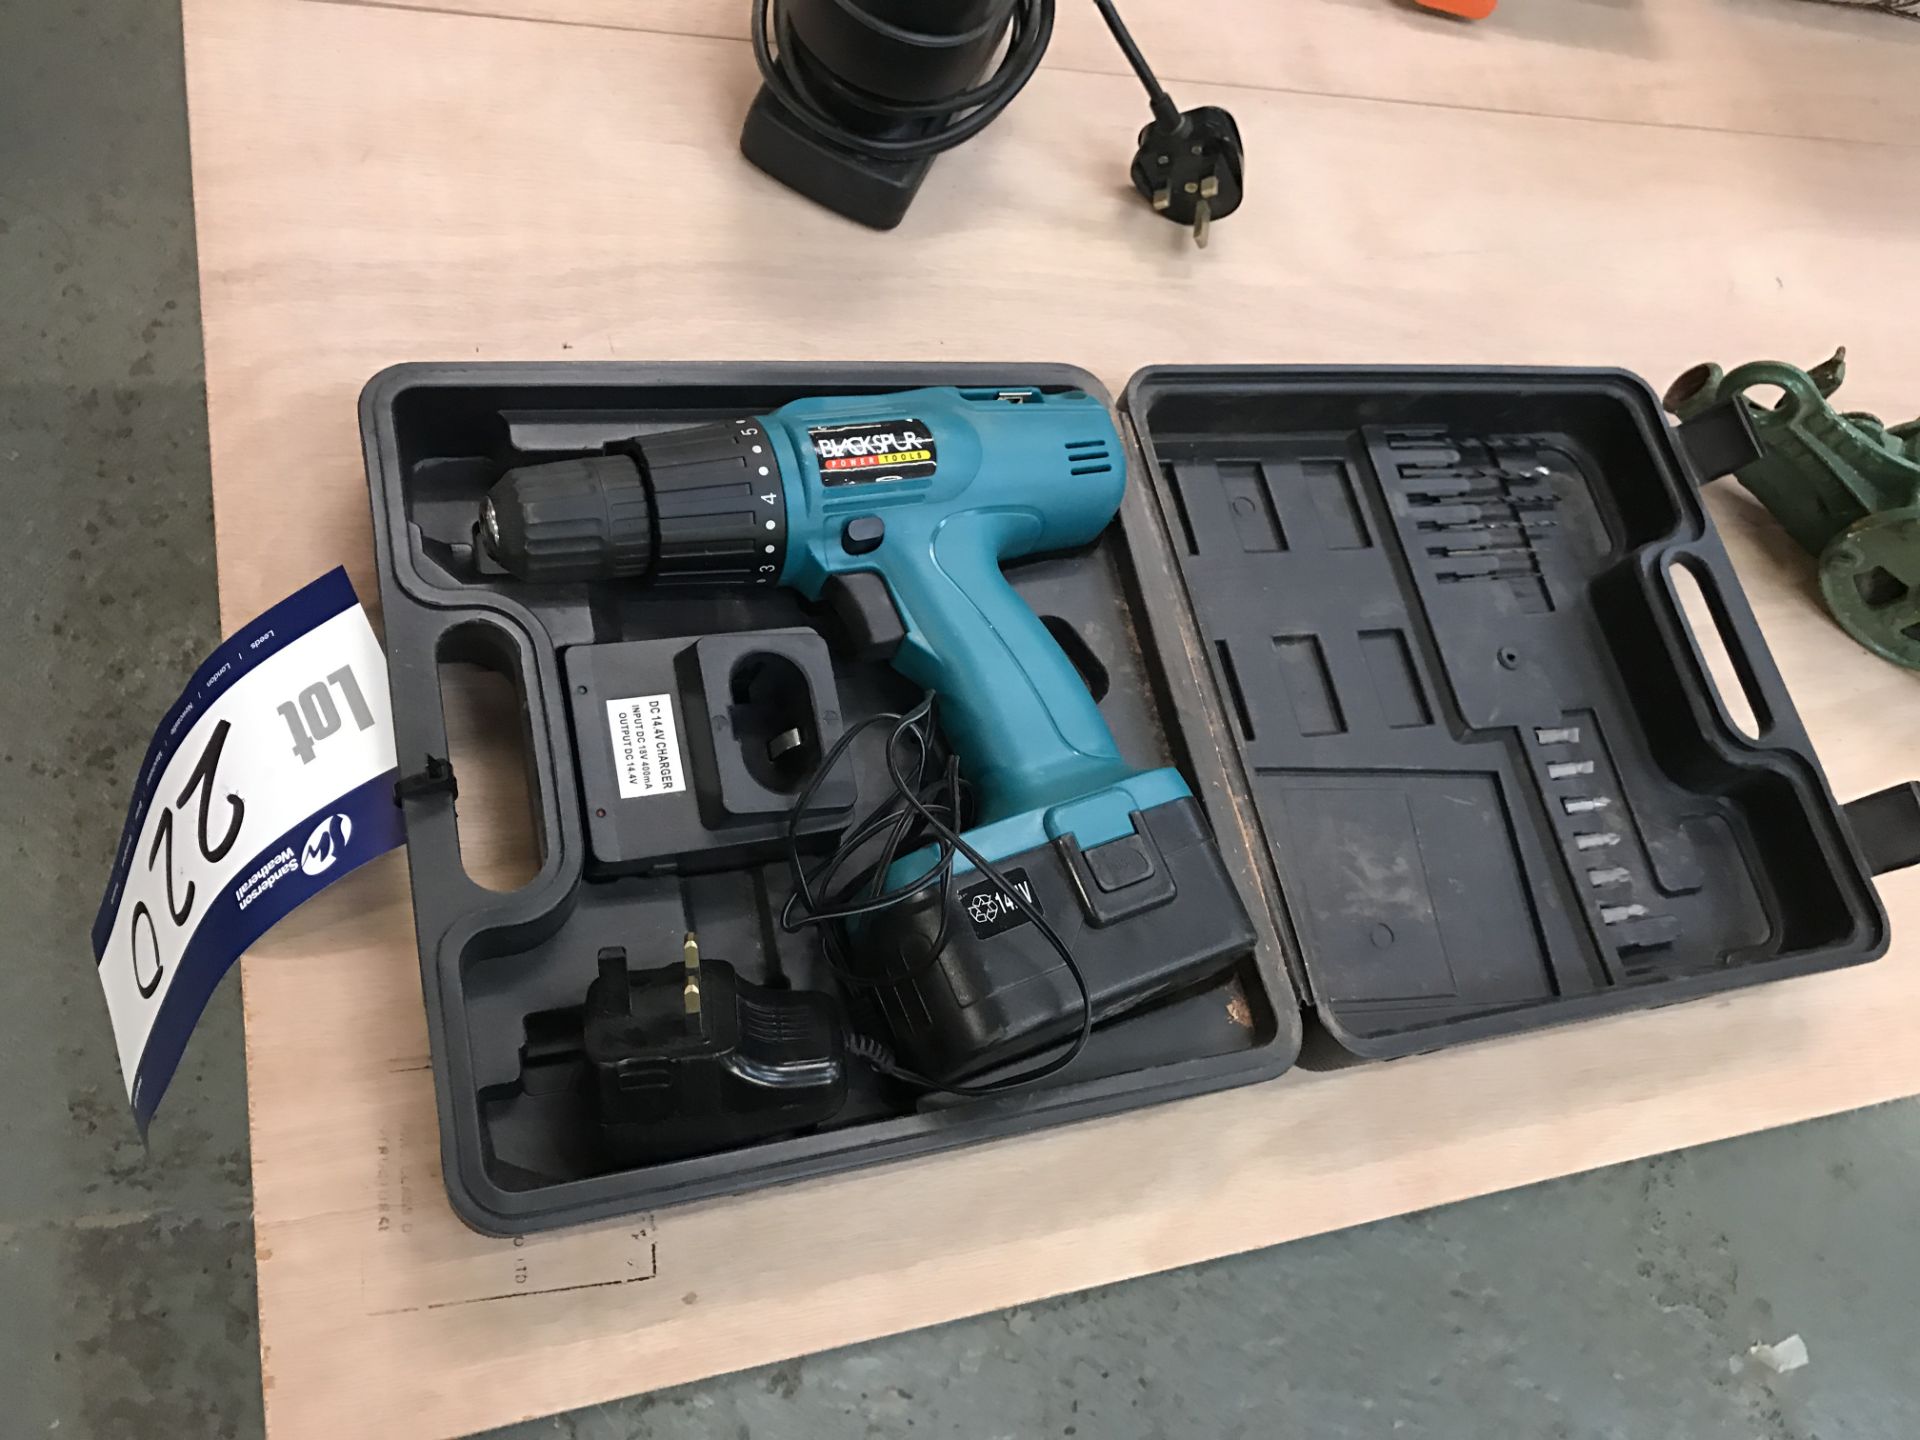 Black Spur 14.4v Cordless Drill c/w Charger and Case - Image 2 of 2